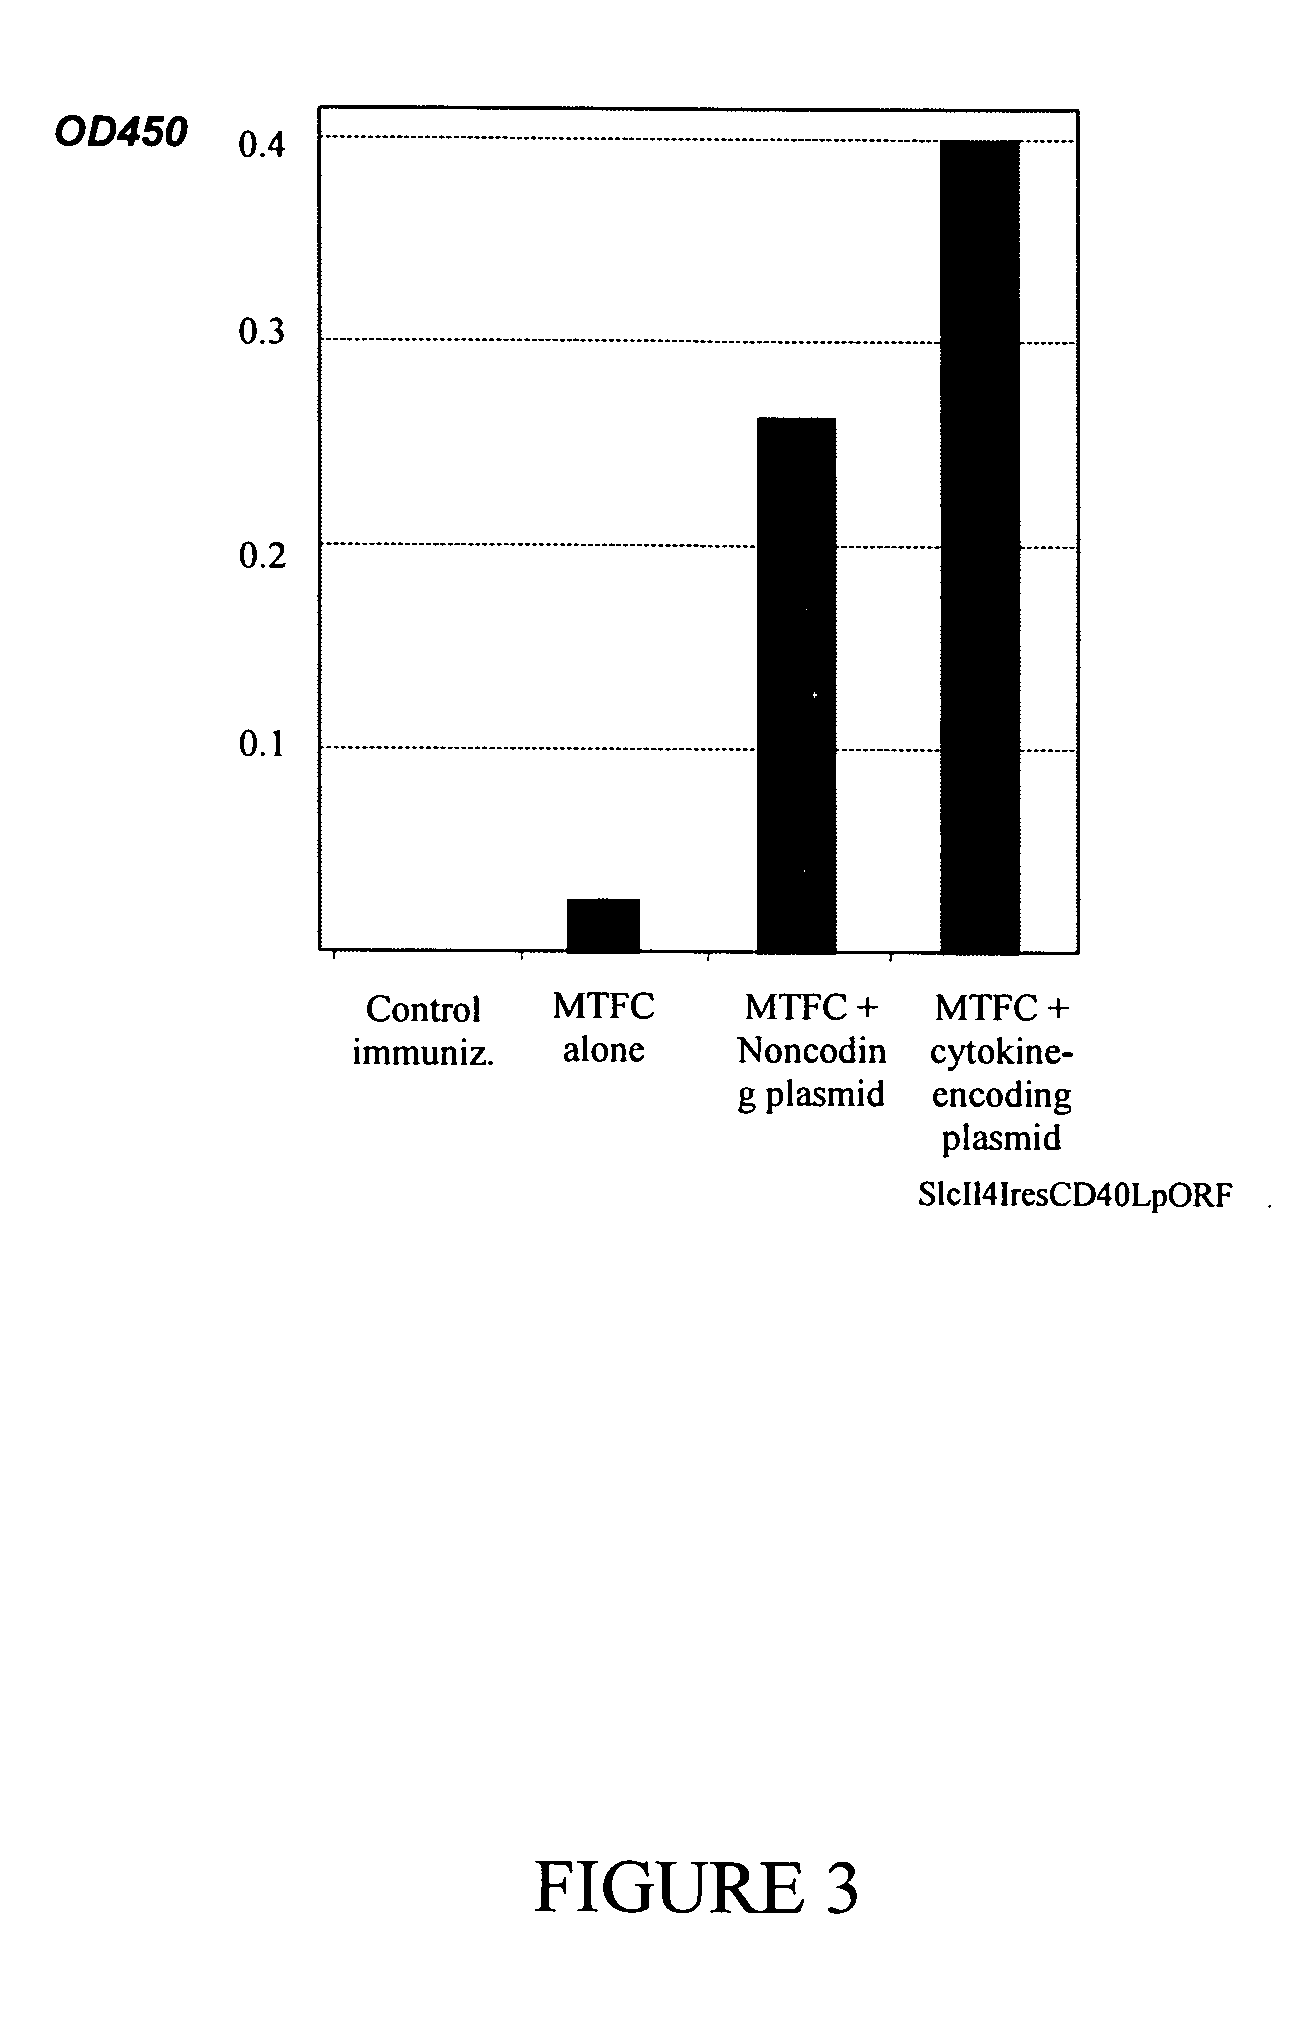 Bacterial plasmid with immunological adjuvant function and uses thereof